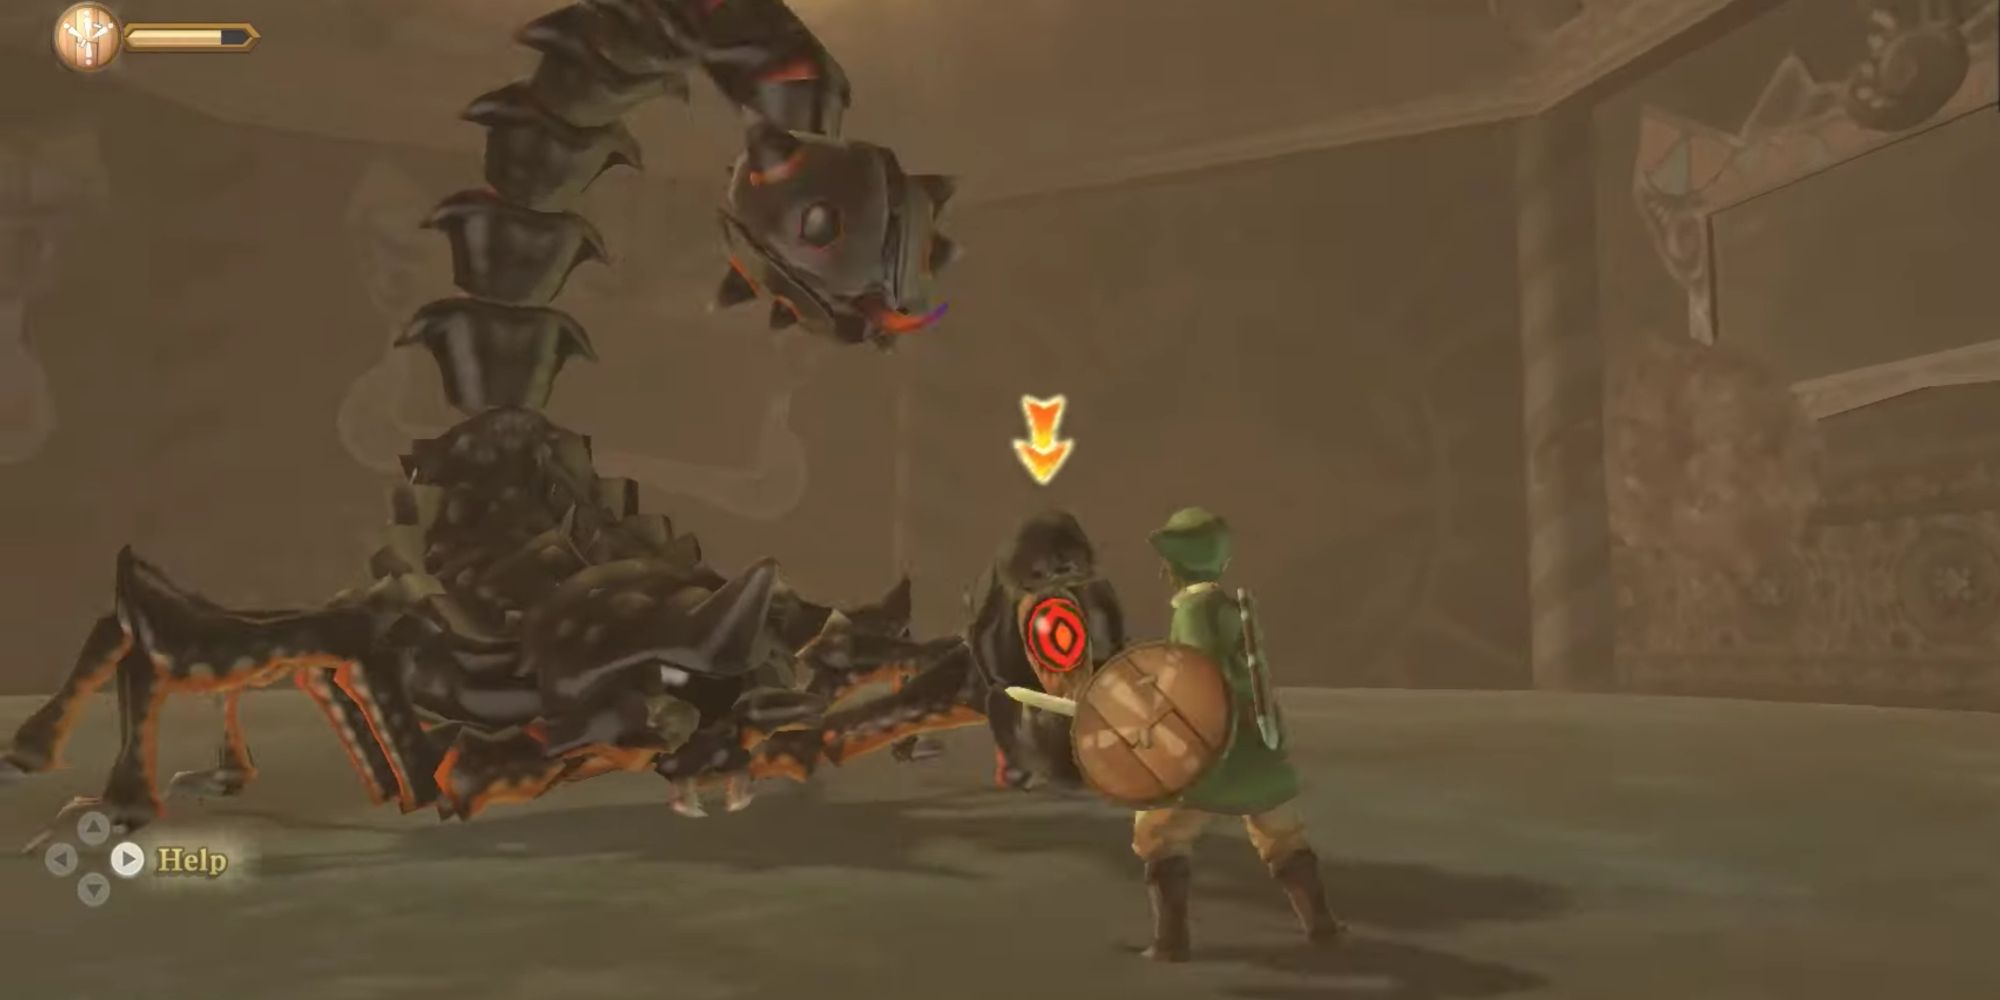 Link facing the scorpion boss in the Lanayru Mining Facility dungeon in the sand pit, the arrow icon calling for an attack.